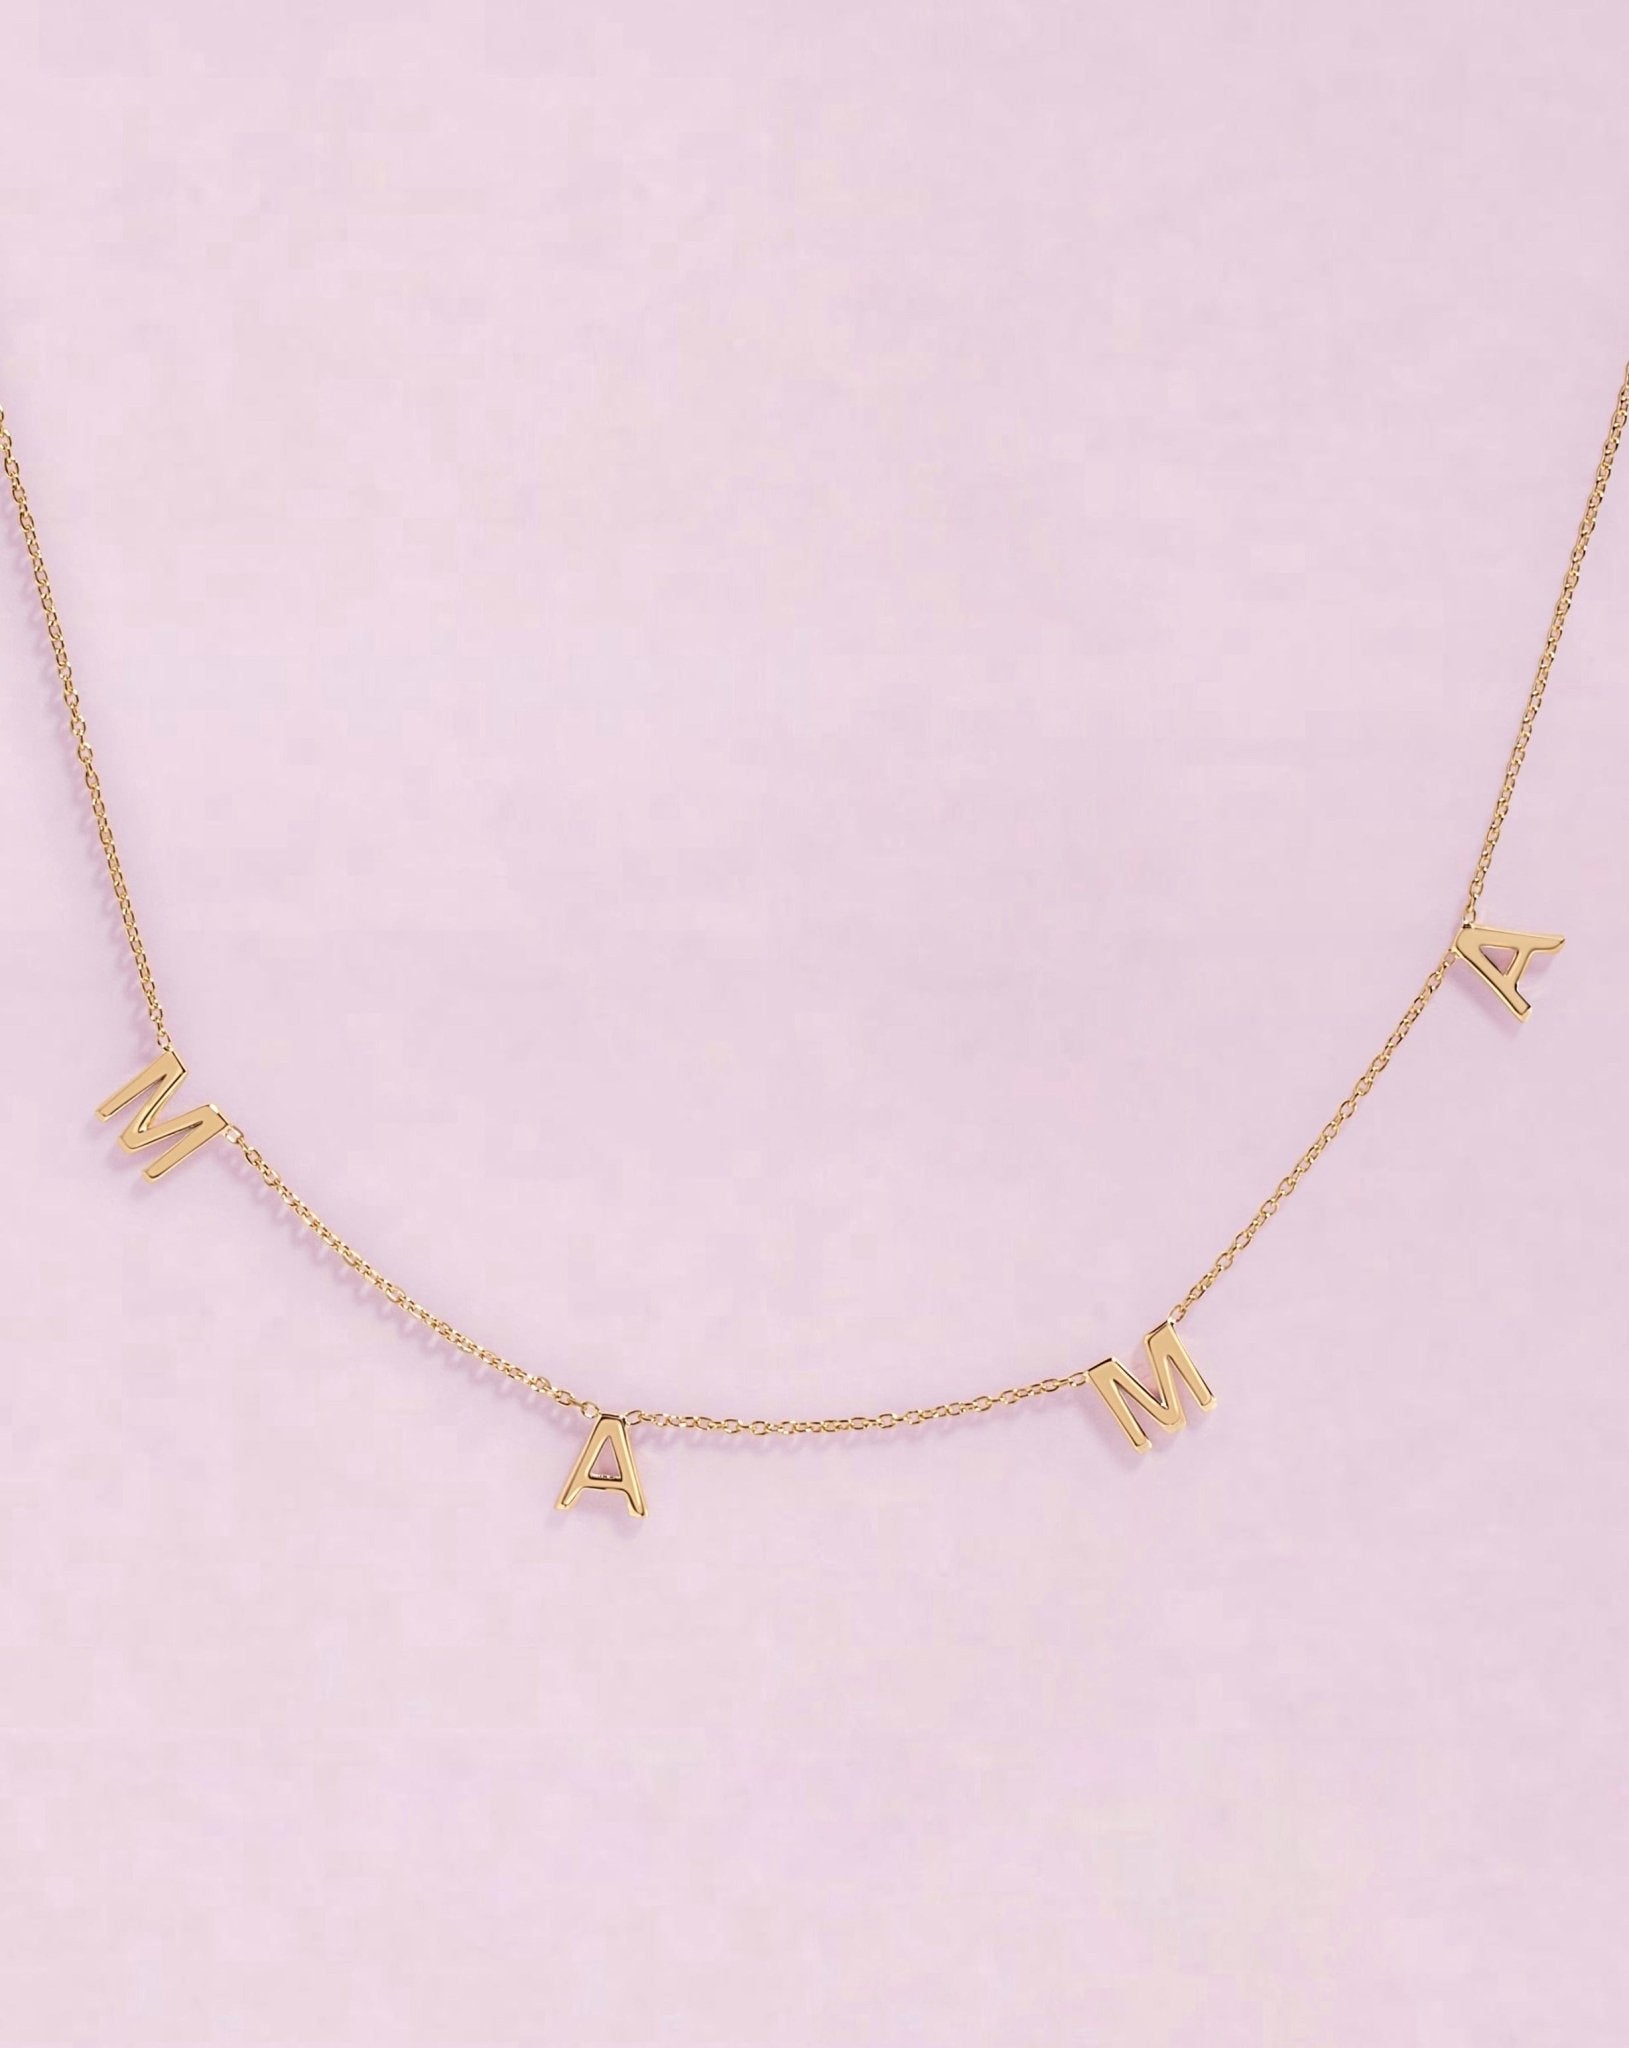 Spaced Gold Initials Necklace - Sparkle Society